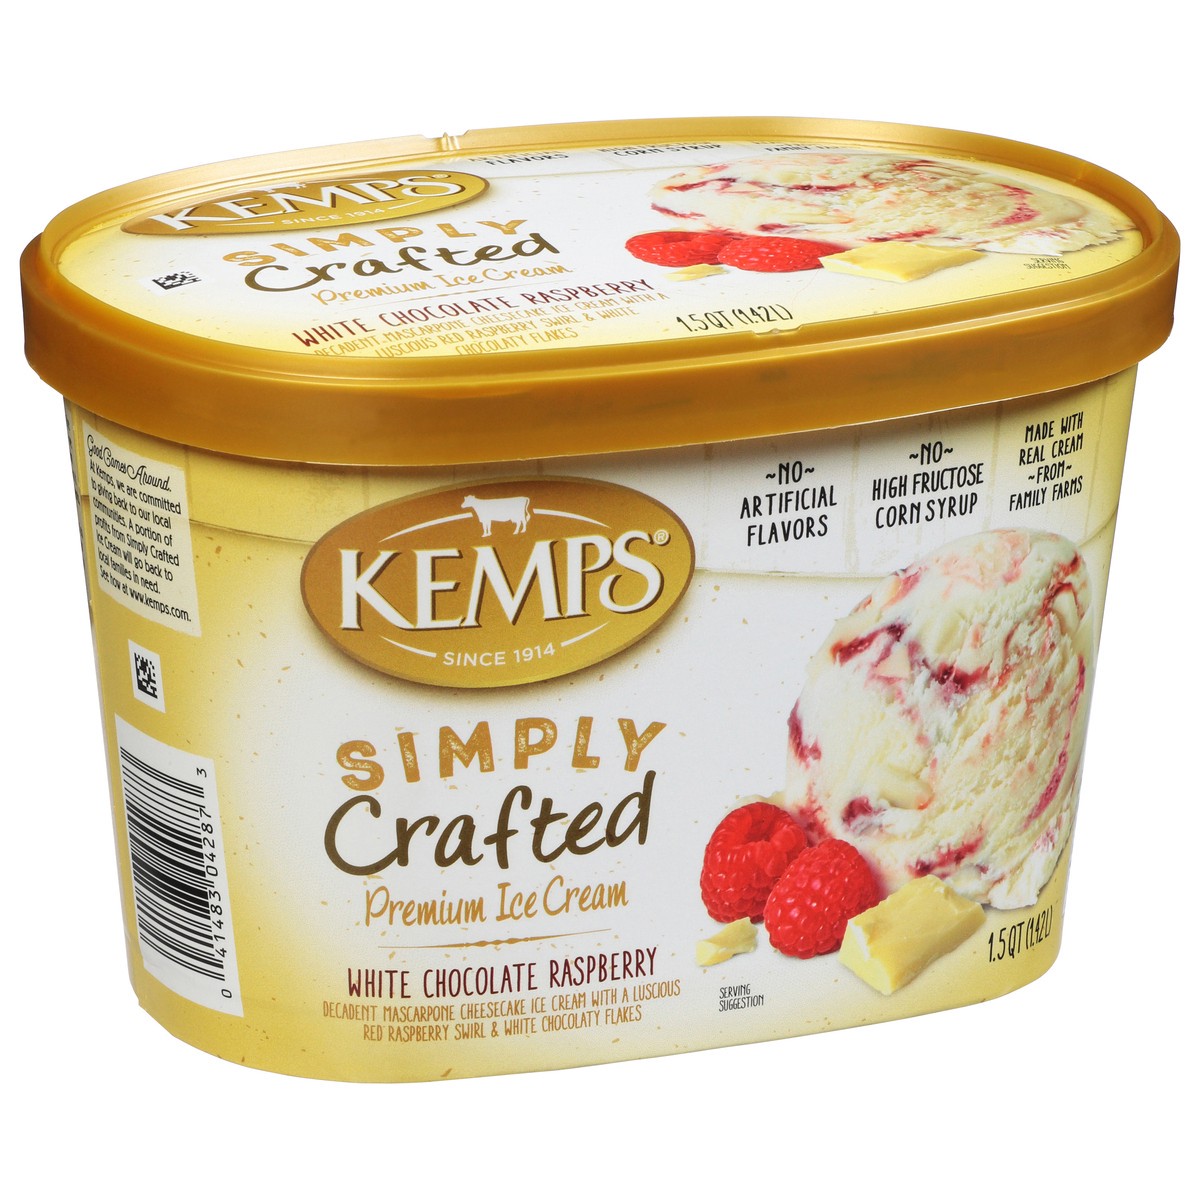 slide 2 of 9, Kemps Simply Crafted Premium White Chocolate Raspberry Ice Cream 1.5 qt, 1.5 qt